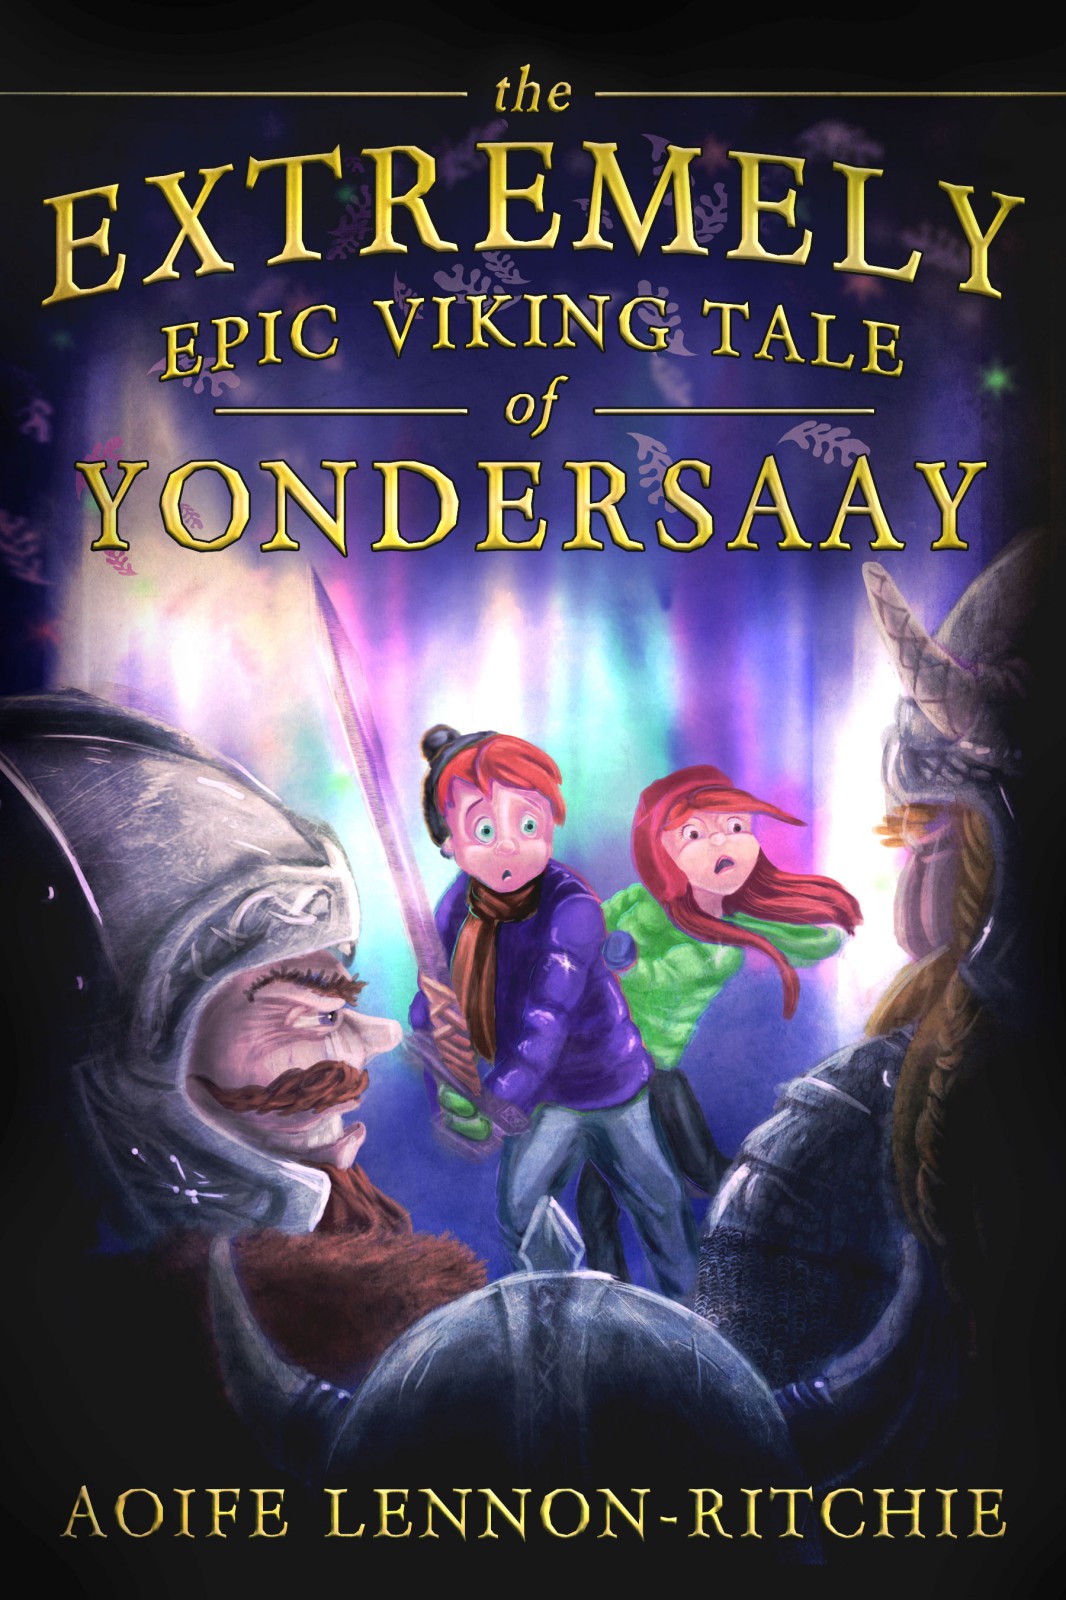 The Extremely Epic Viking Tale of Yondersaay